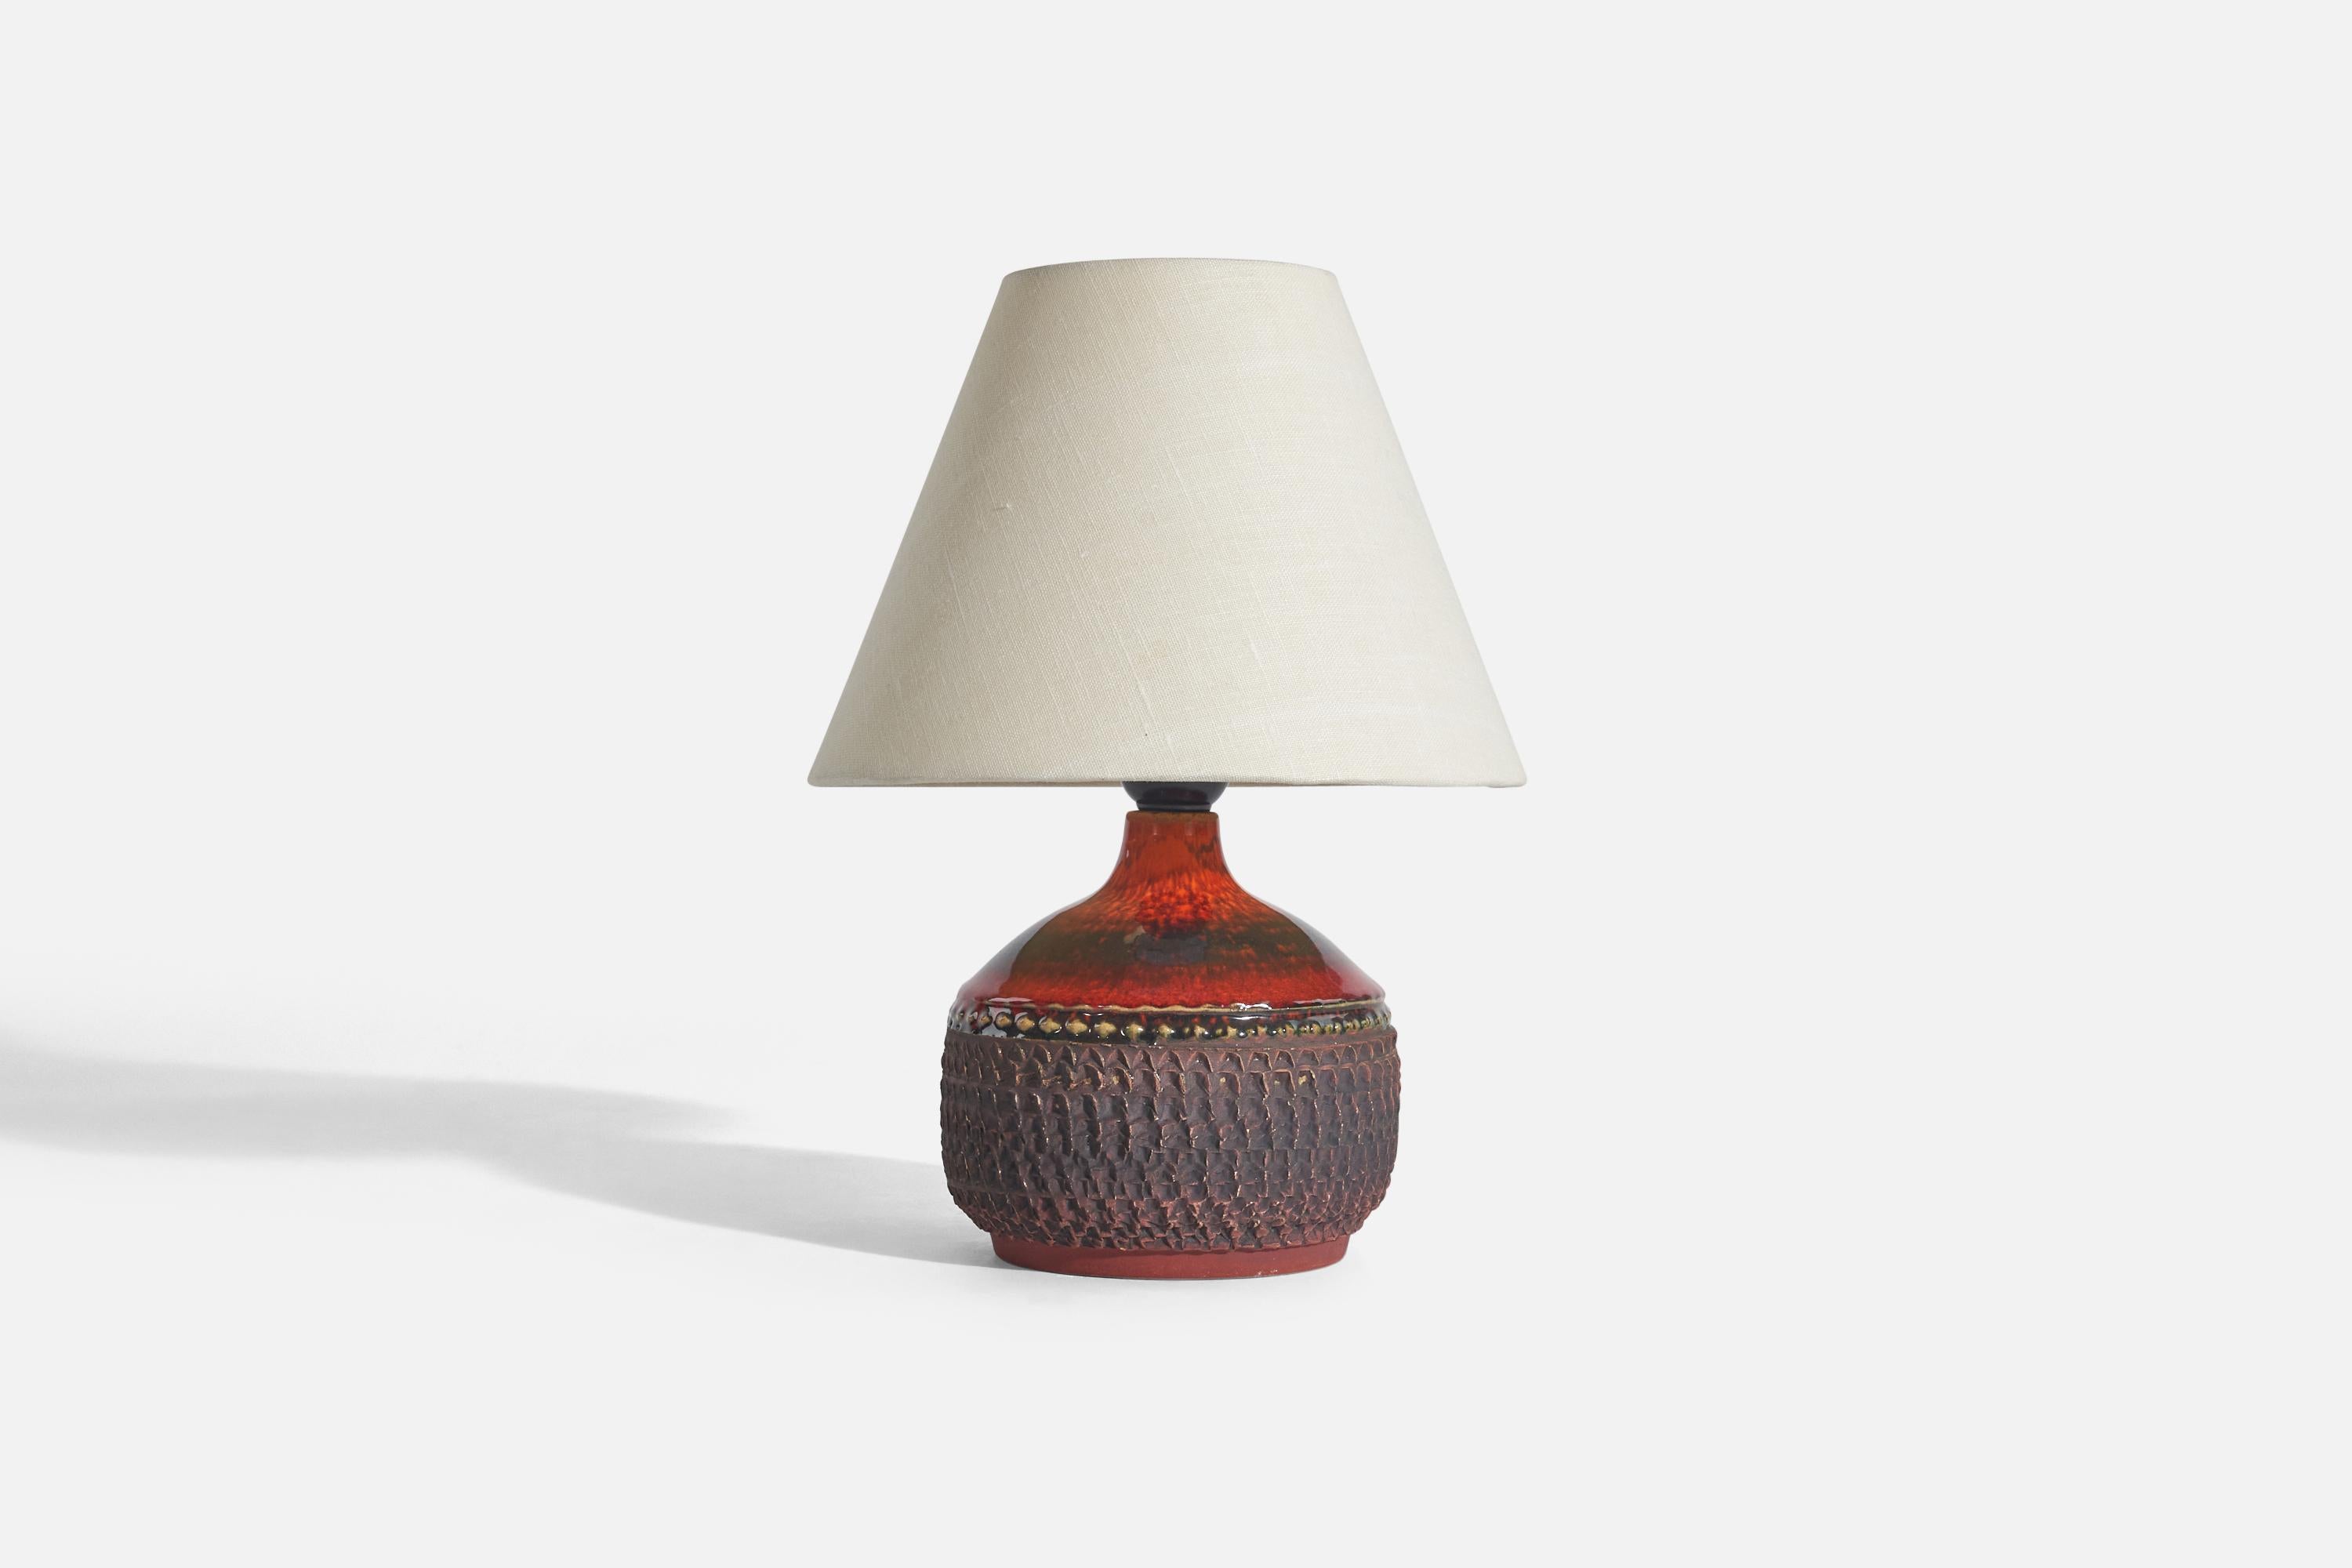 A red and brown, glazed stoneware table lamp designed and produced by Klase Höganäs, Sweden, 1960s. 

Sold without Lampshade(s)
Dimensions of lamp (inches) : 7.31 x 5.28 x 5.28 (Height x Width x Depth)
Dimensions of shade (inches) : 4 x 8.25 x